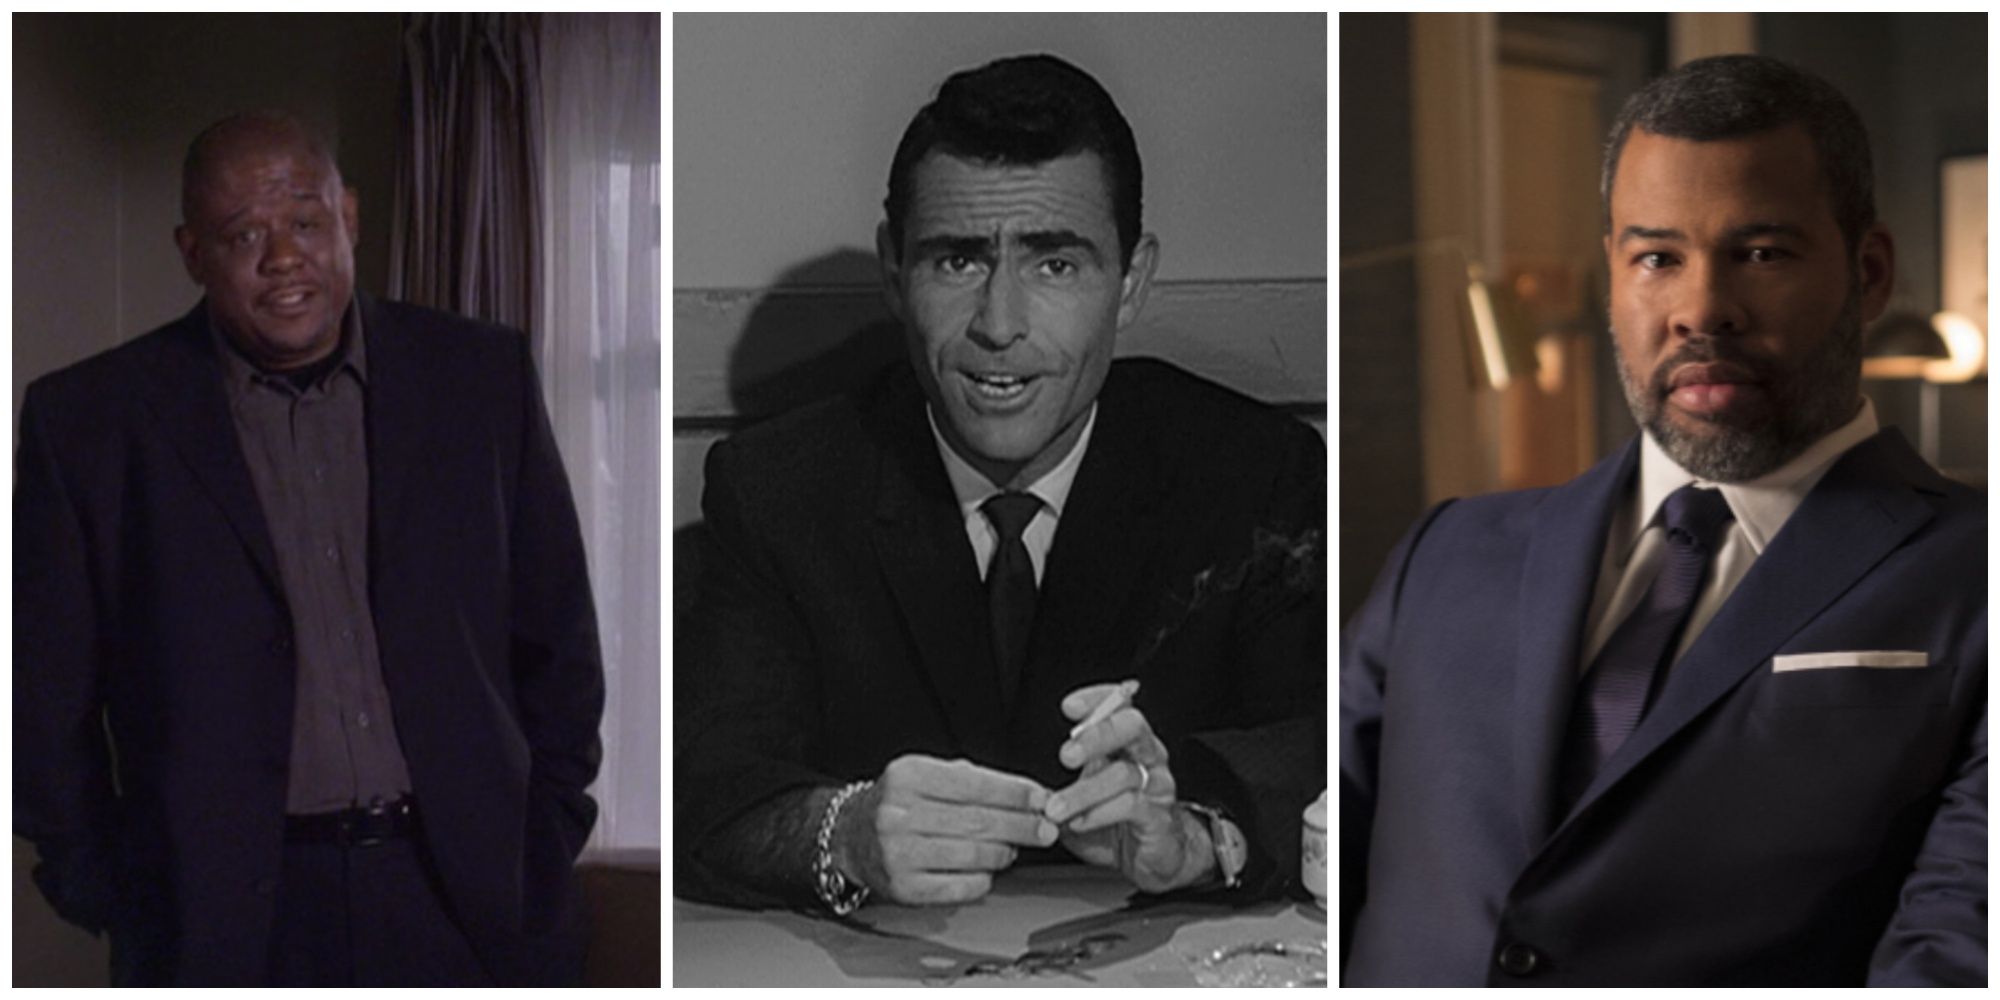 Split image showing the hosts of three versions of The Twilight Zone (Forest Whitaker, Rod Serling, and Jordan Peele).